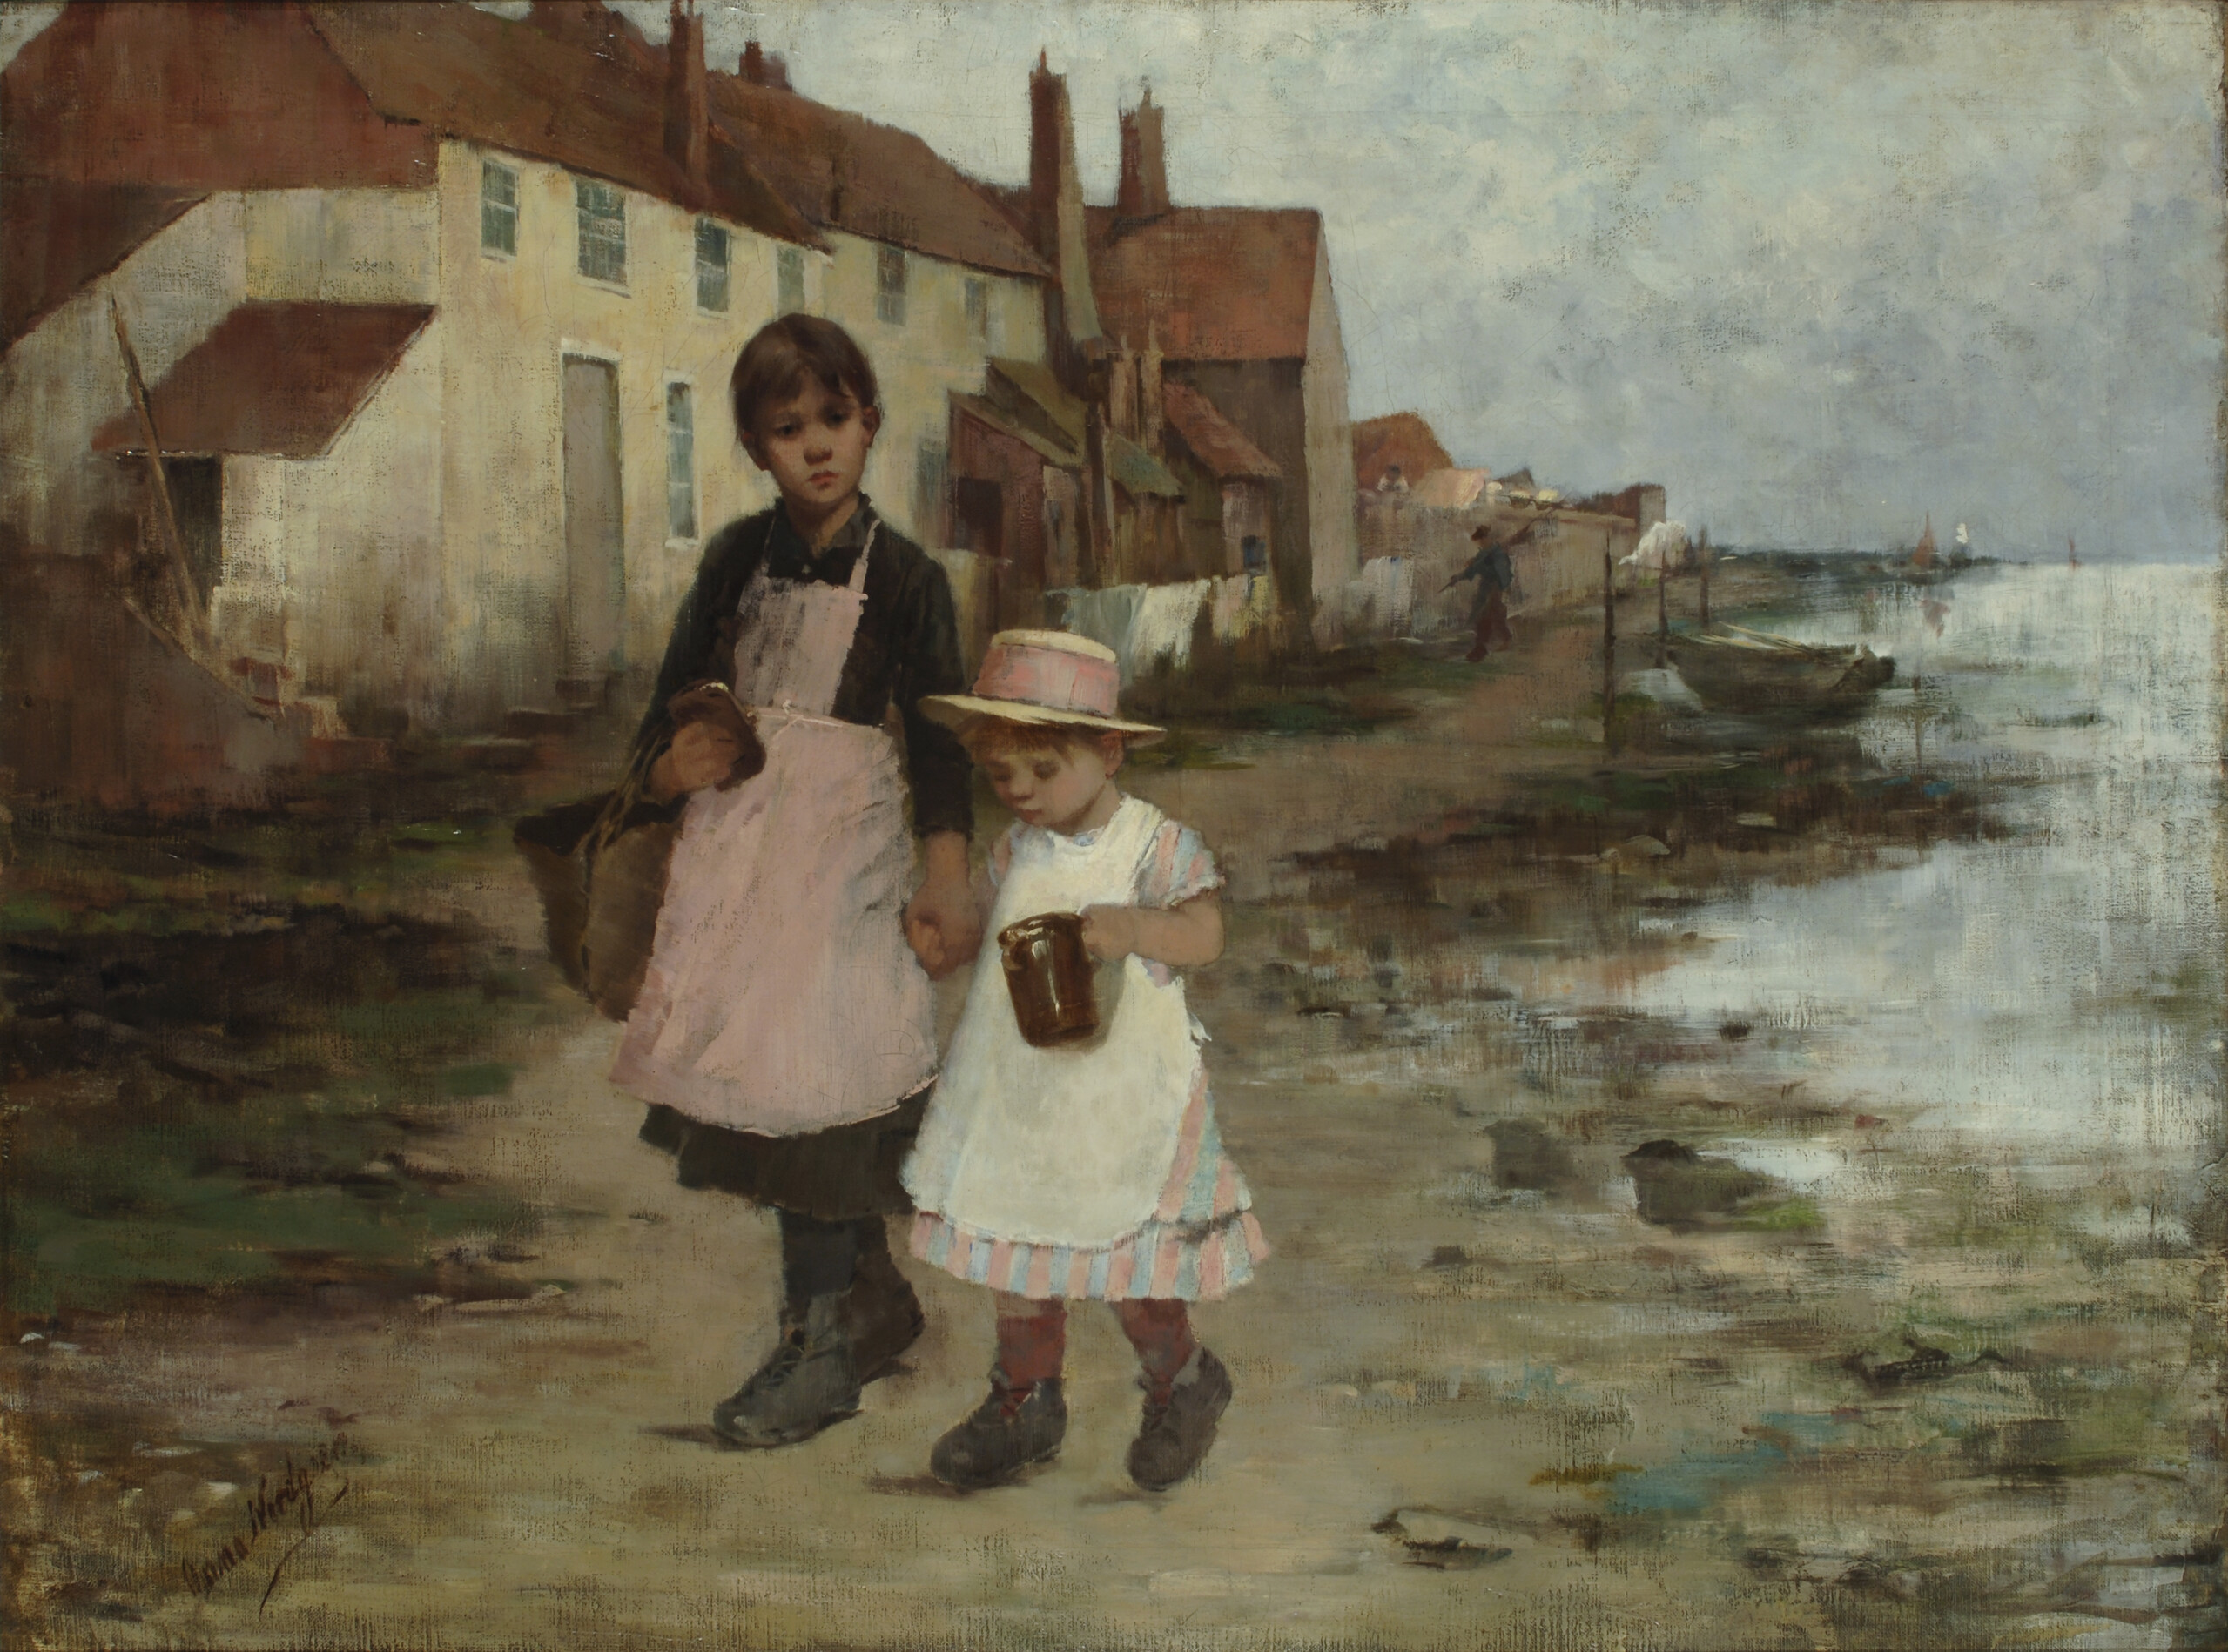 An oil painting comprised of soft brushstrokes of two young girls holding hands and walking along a shoreline. Behind them is a row of houses.